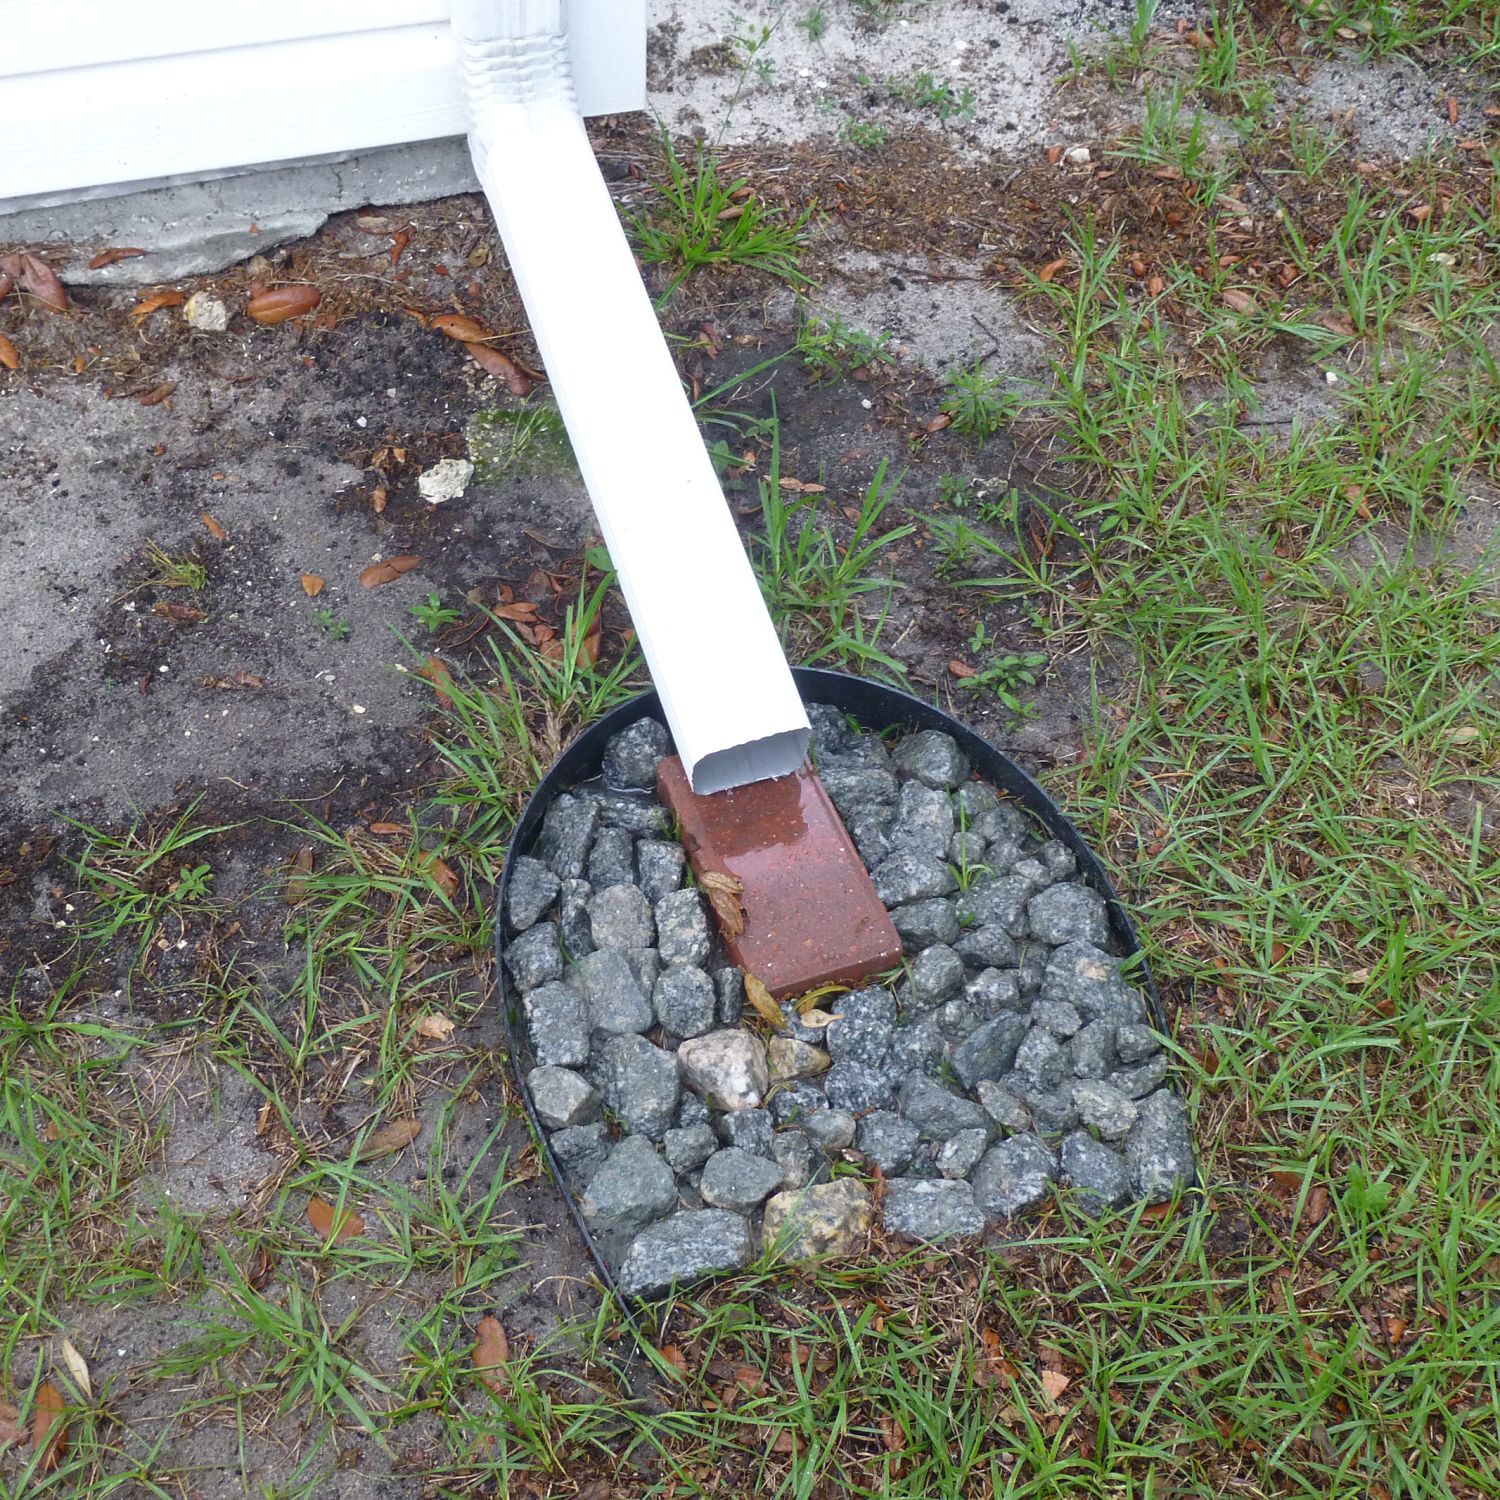 Proper downspout drainage for a house